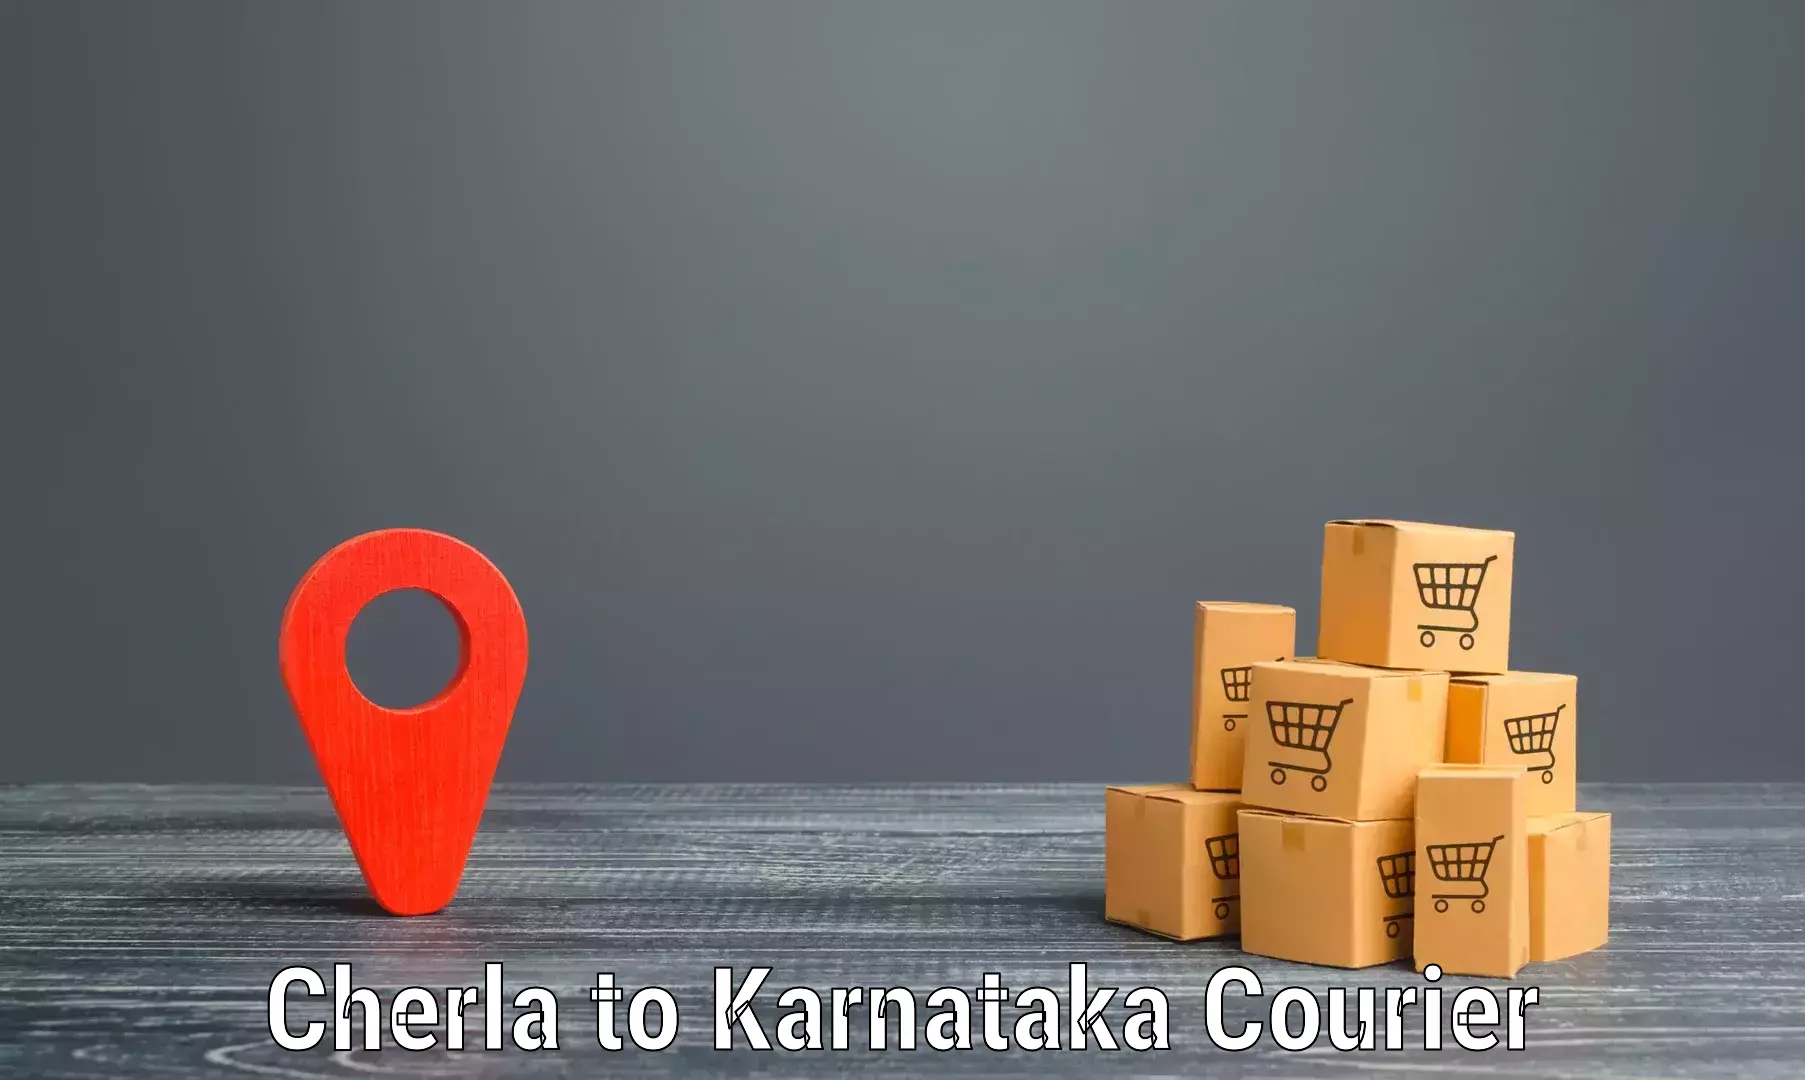 Courier service booking Cherla to Manipal